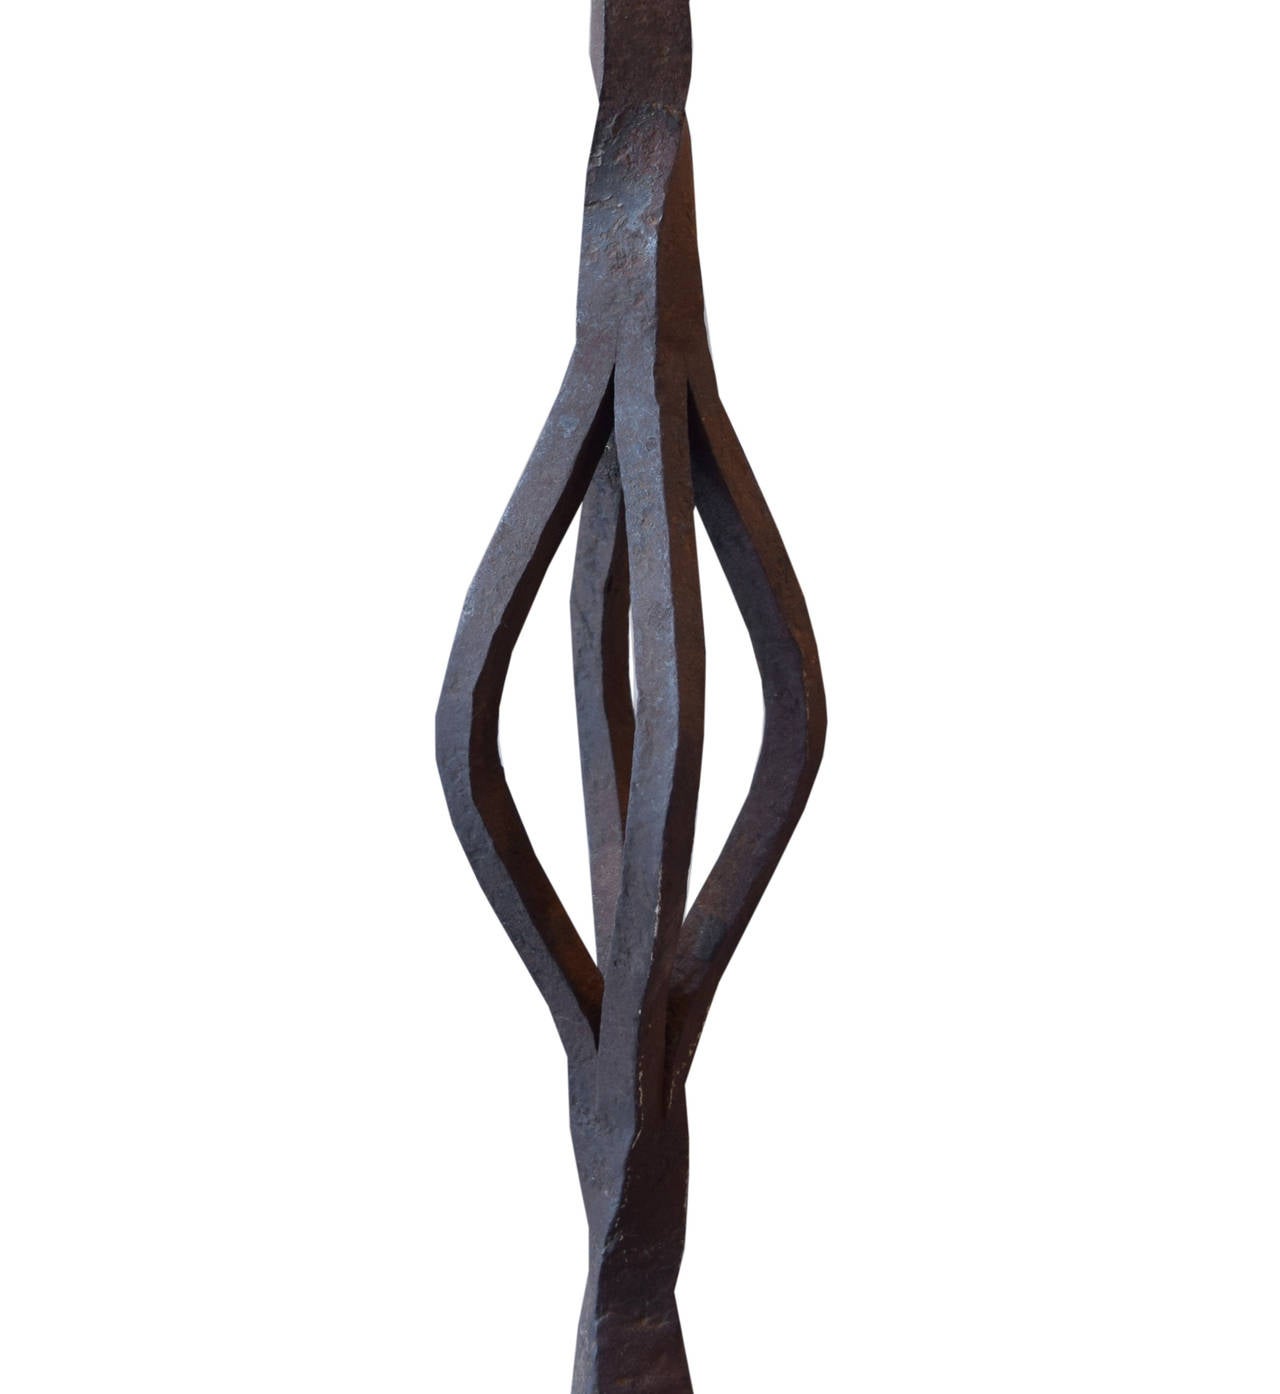 Argentine Wrought Iron Candle Stand by Jose Thenee